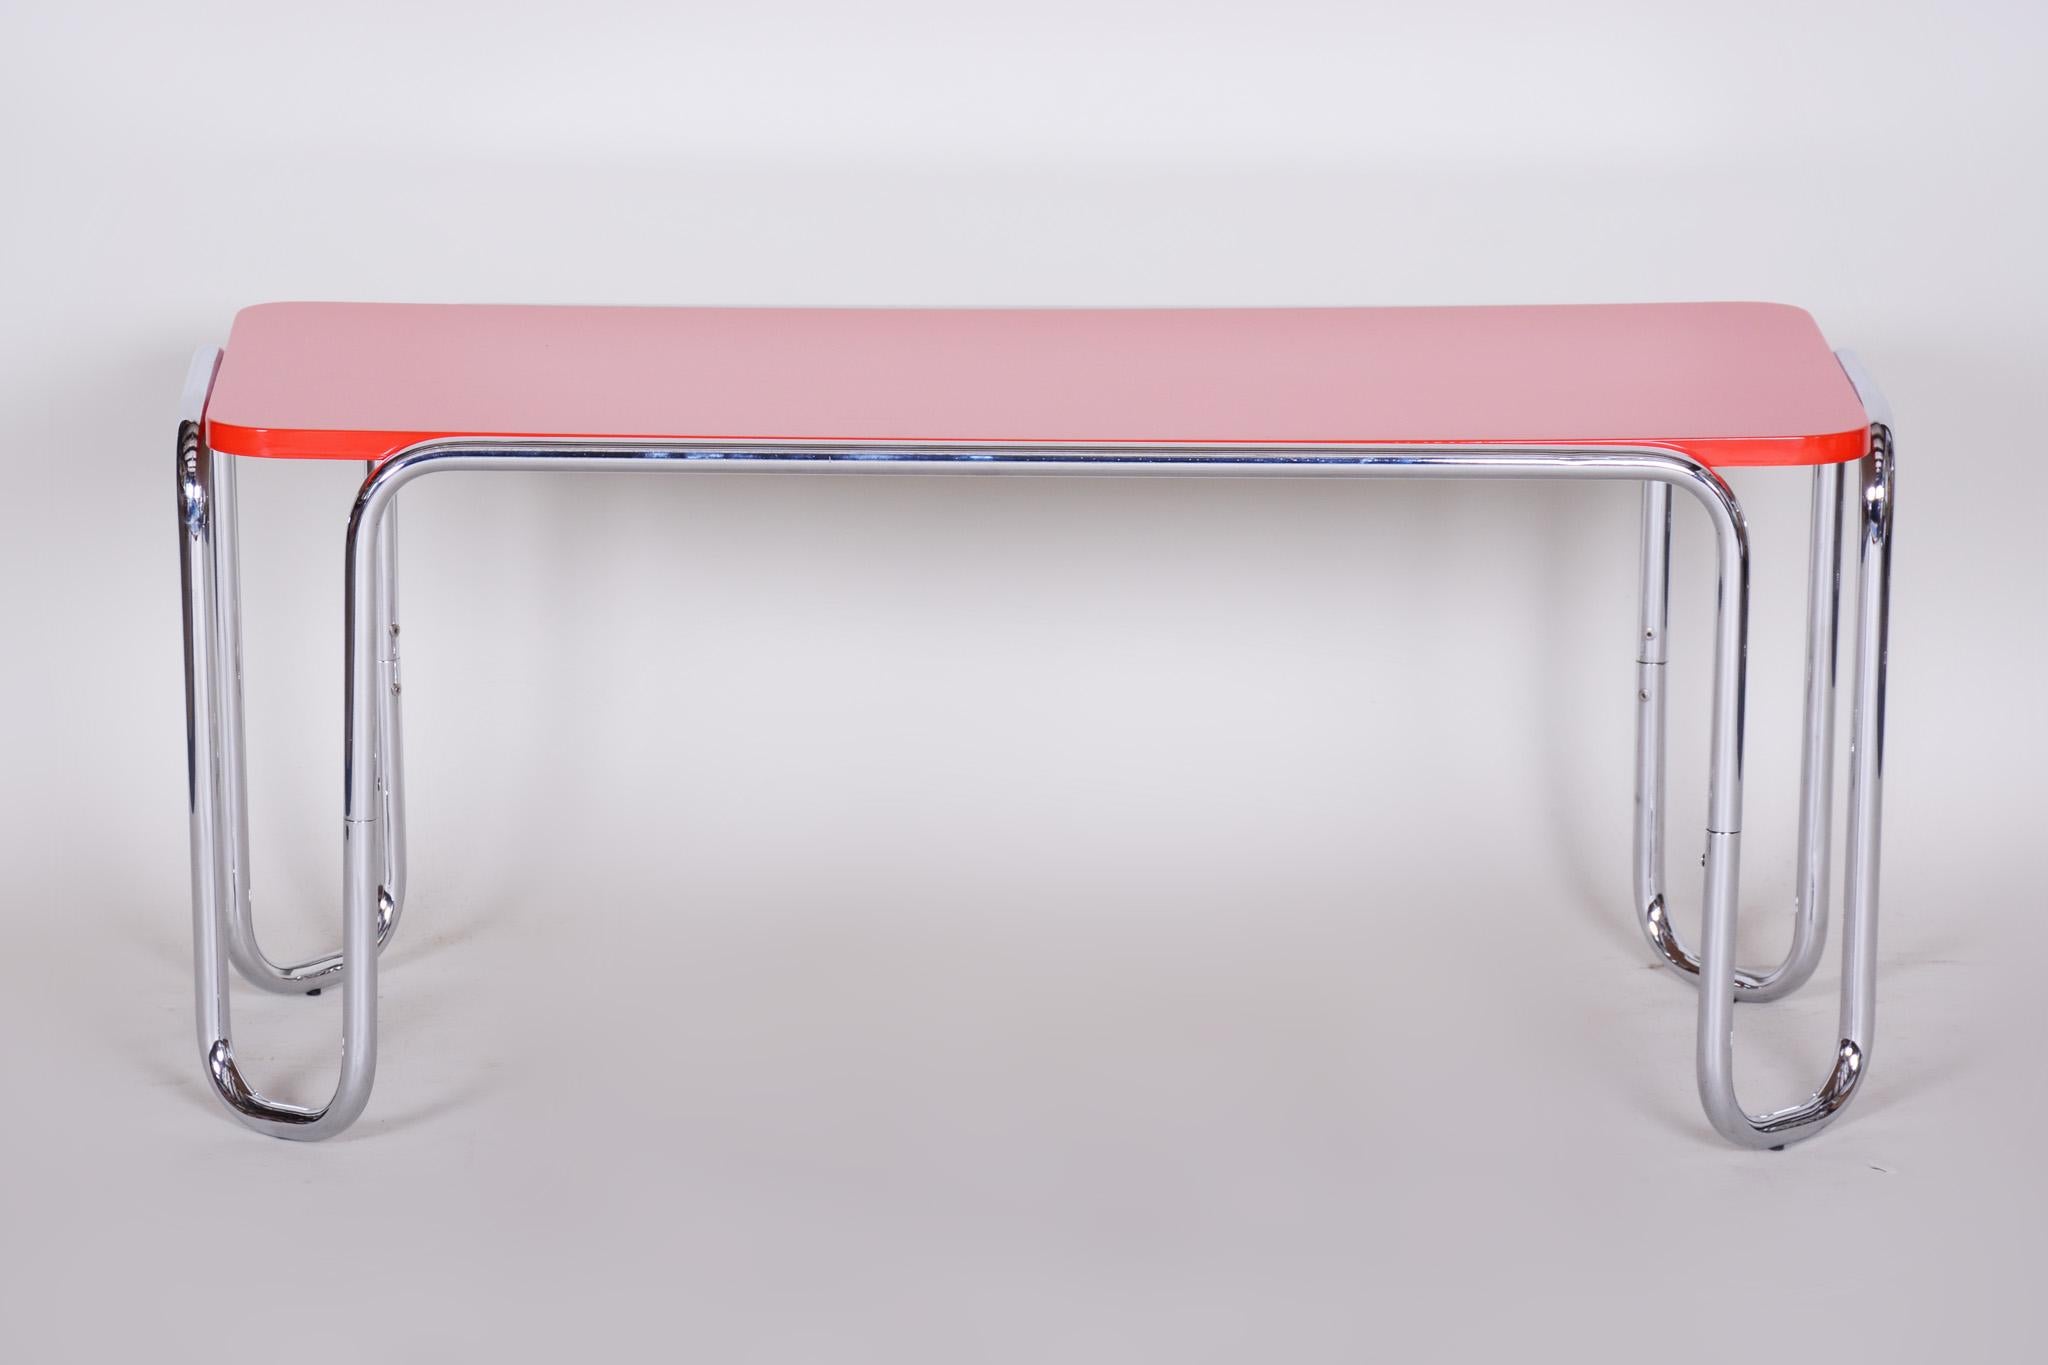 Small chrome Bauhaus table
Period: 1950-1959
Material: Chrome and lacquered wood
Source: Czech.